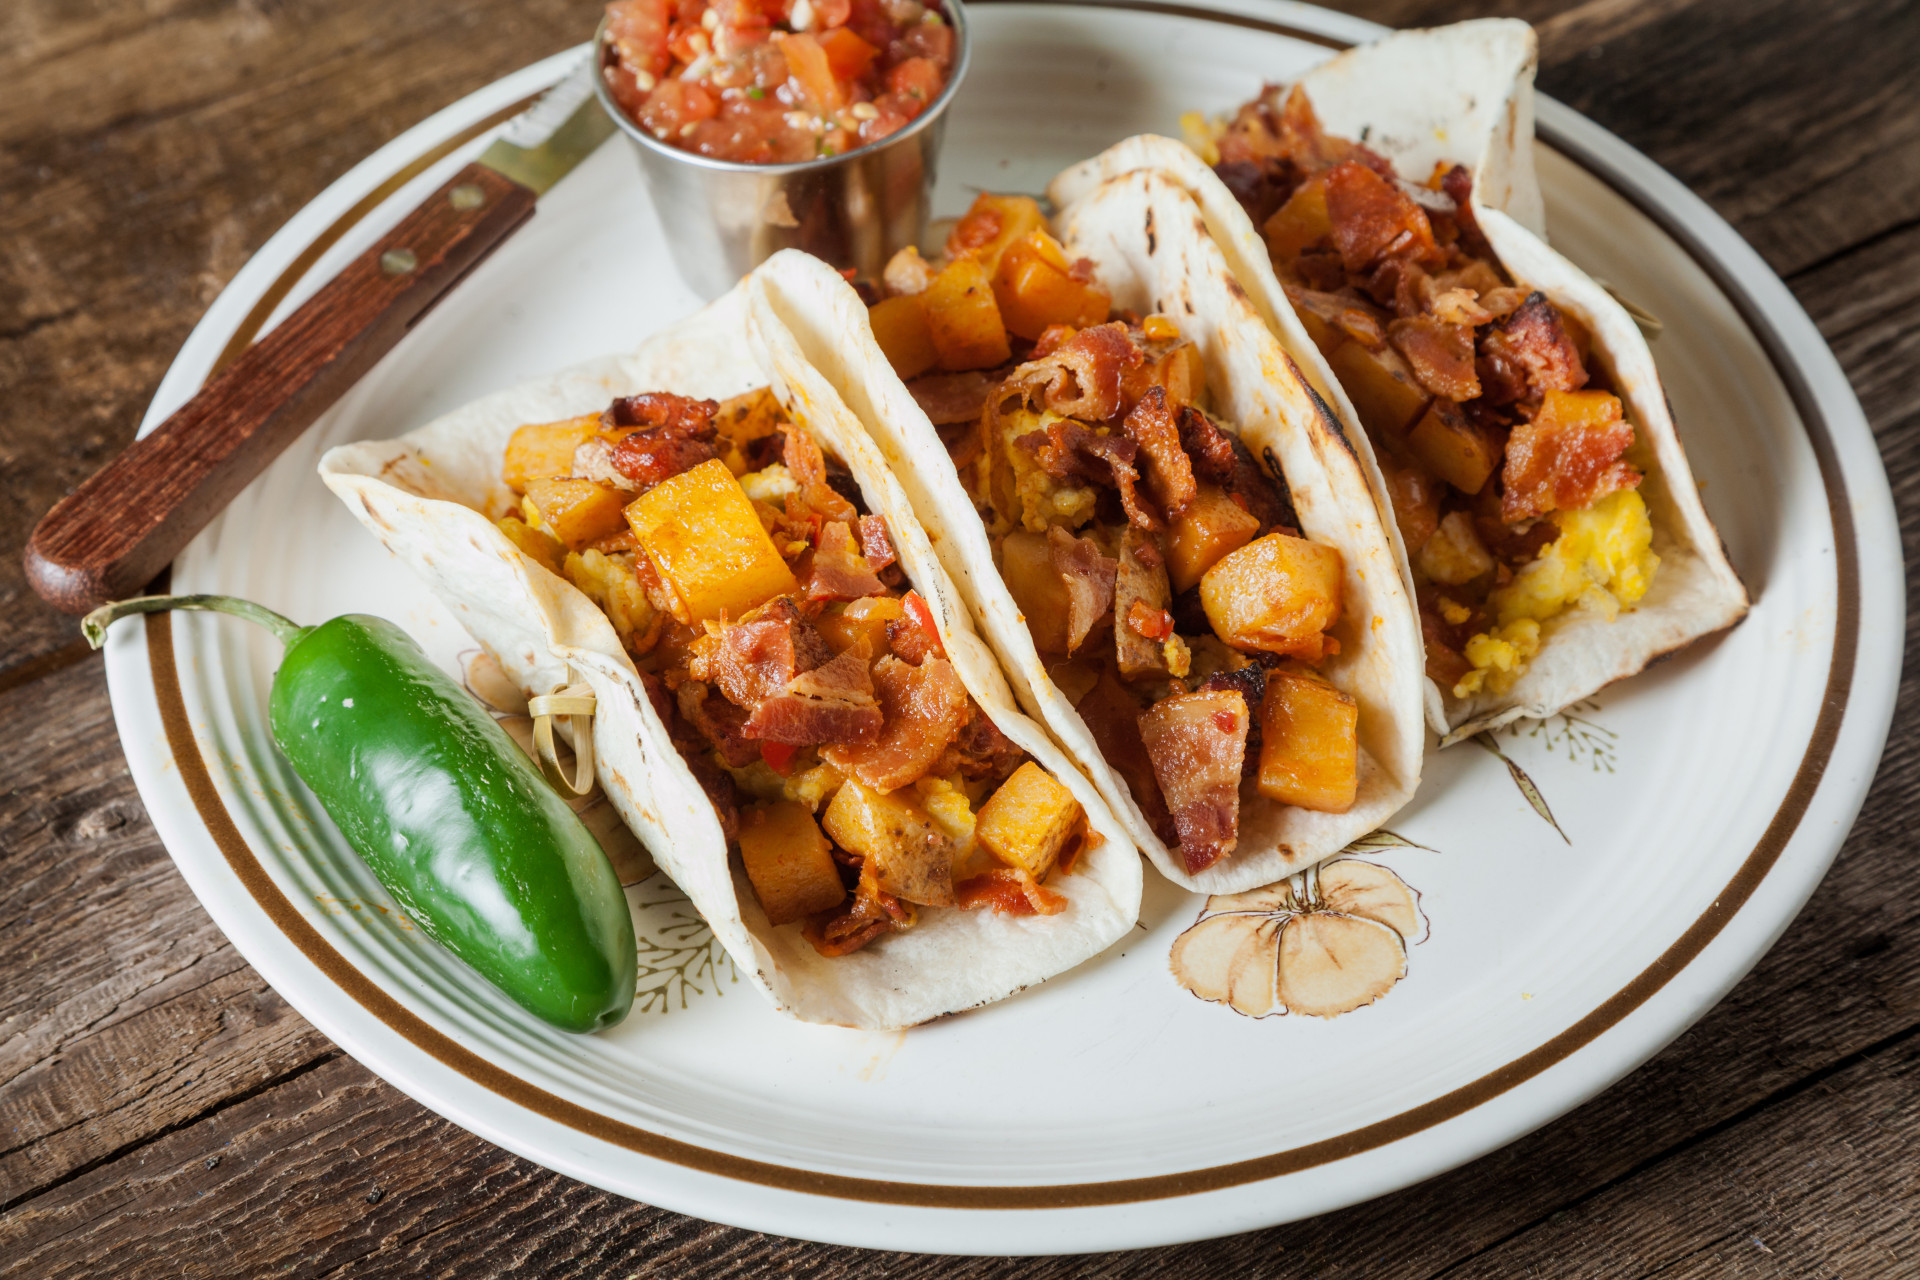 Start your day of adventure the right way with a few of Austin's famous breakfast tacos.